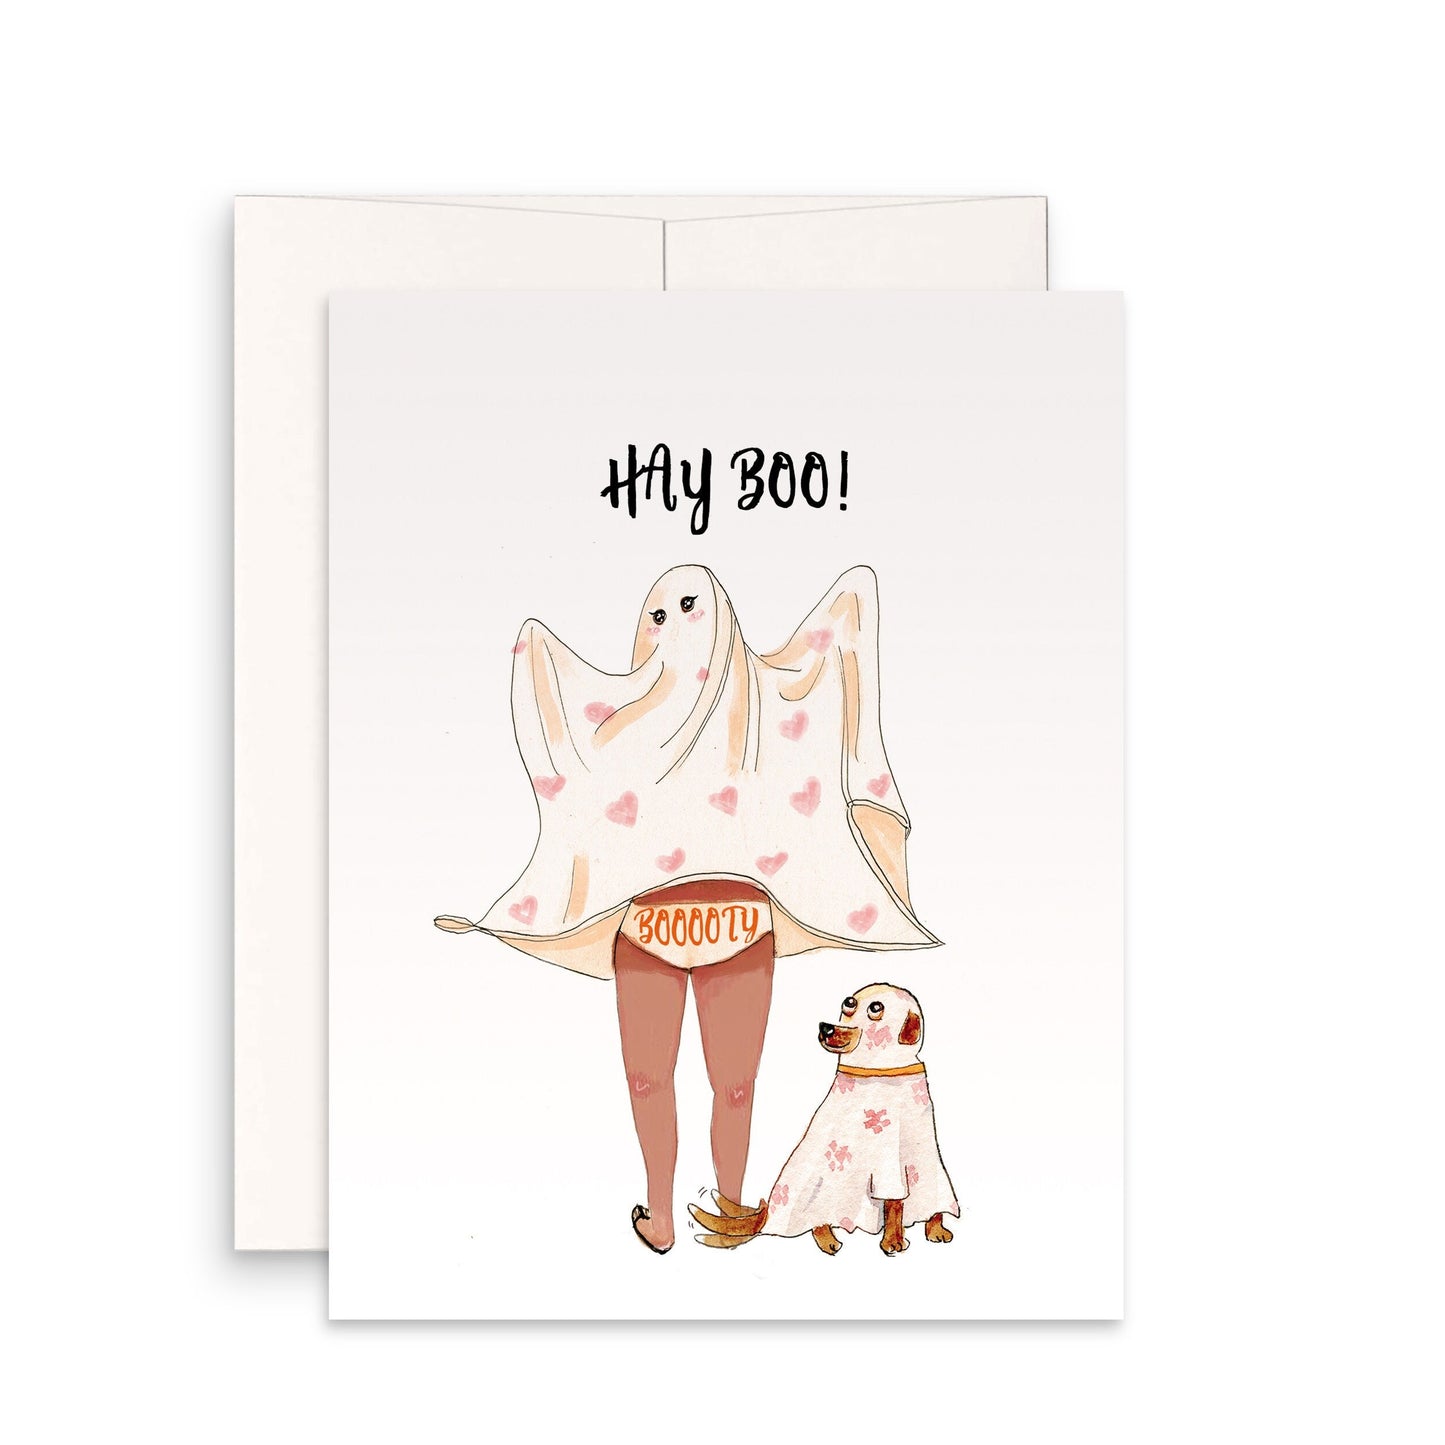 Funny Halloween Cards For Boyfriend - Boo Booty Love Card From Girlfriend